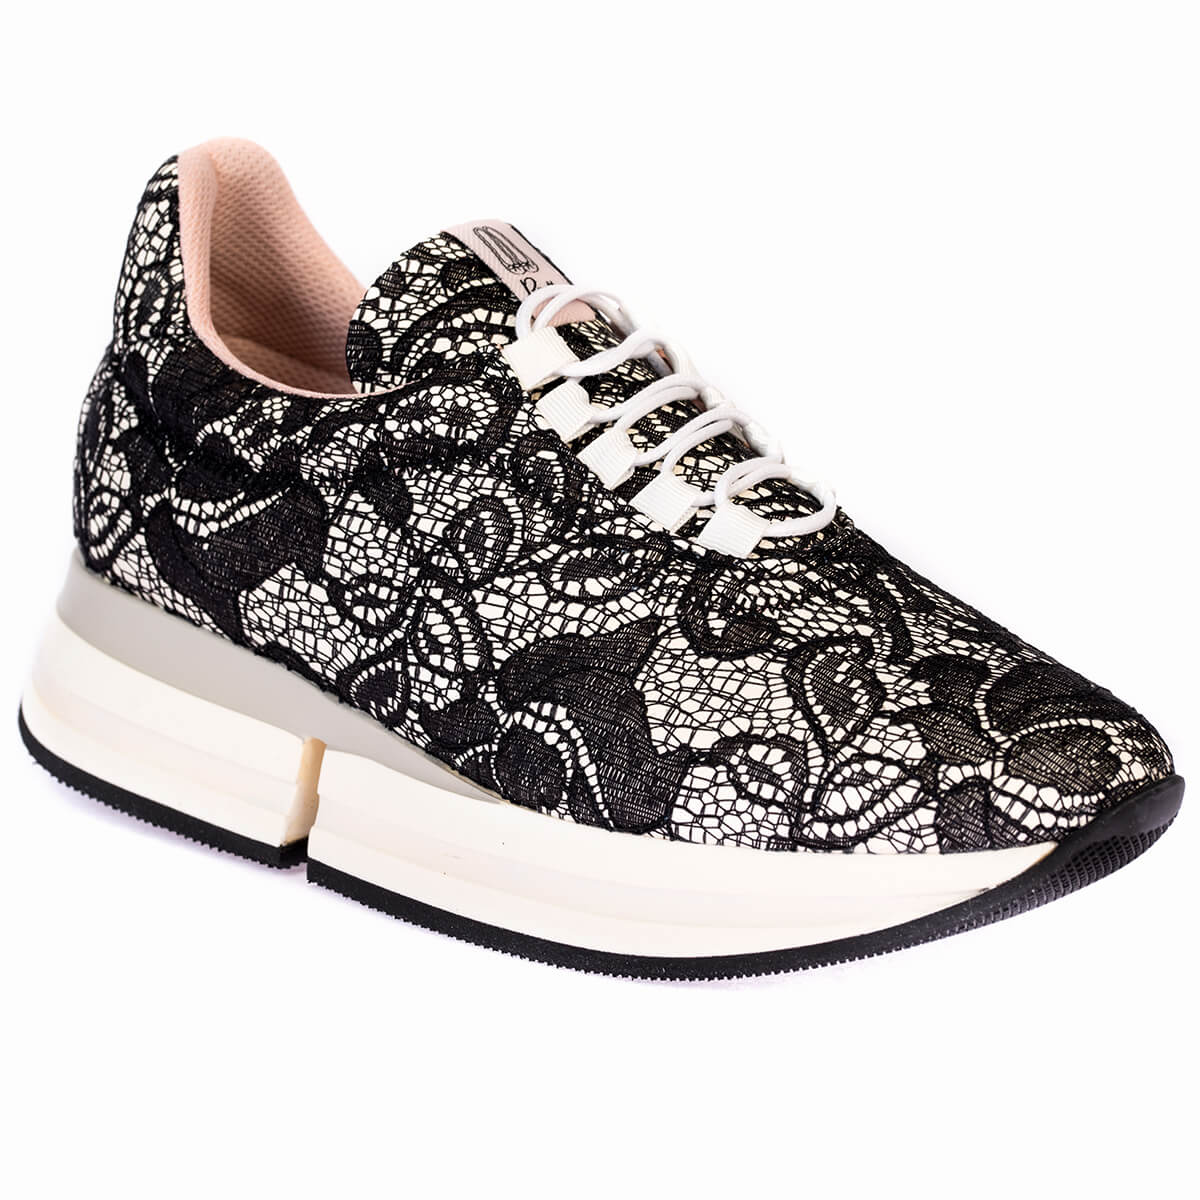 Worn by Olivia Palermo.Black sneakers with lace